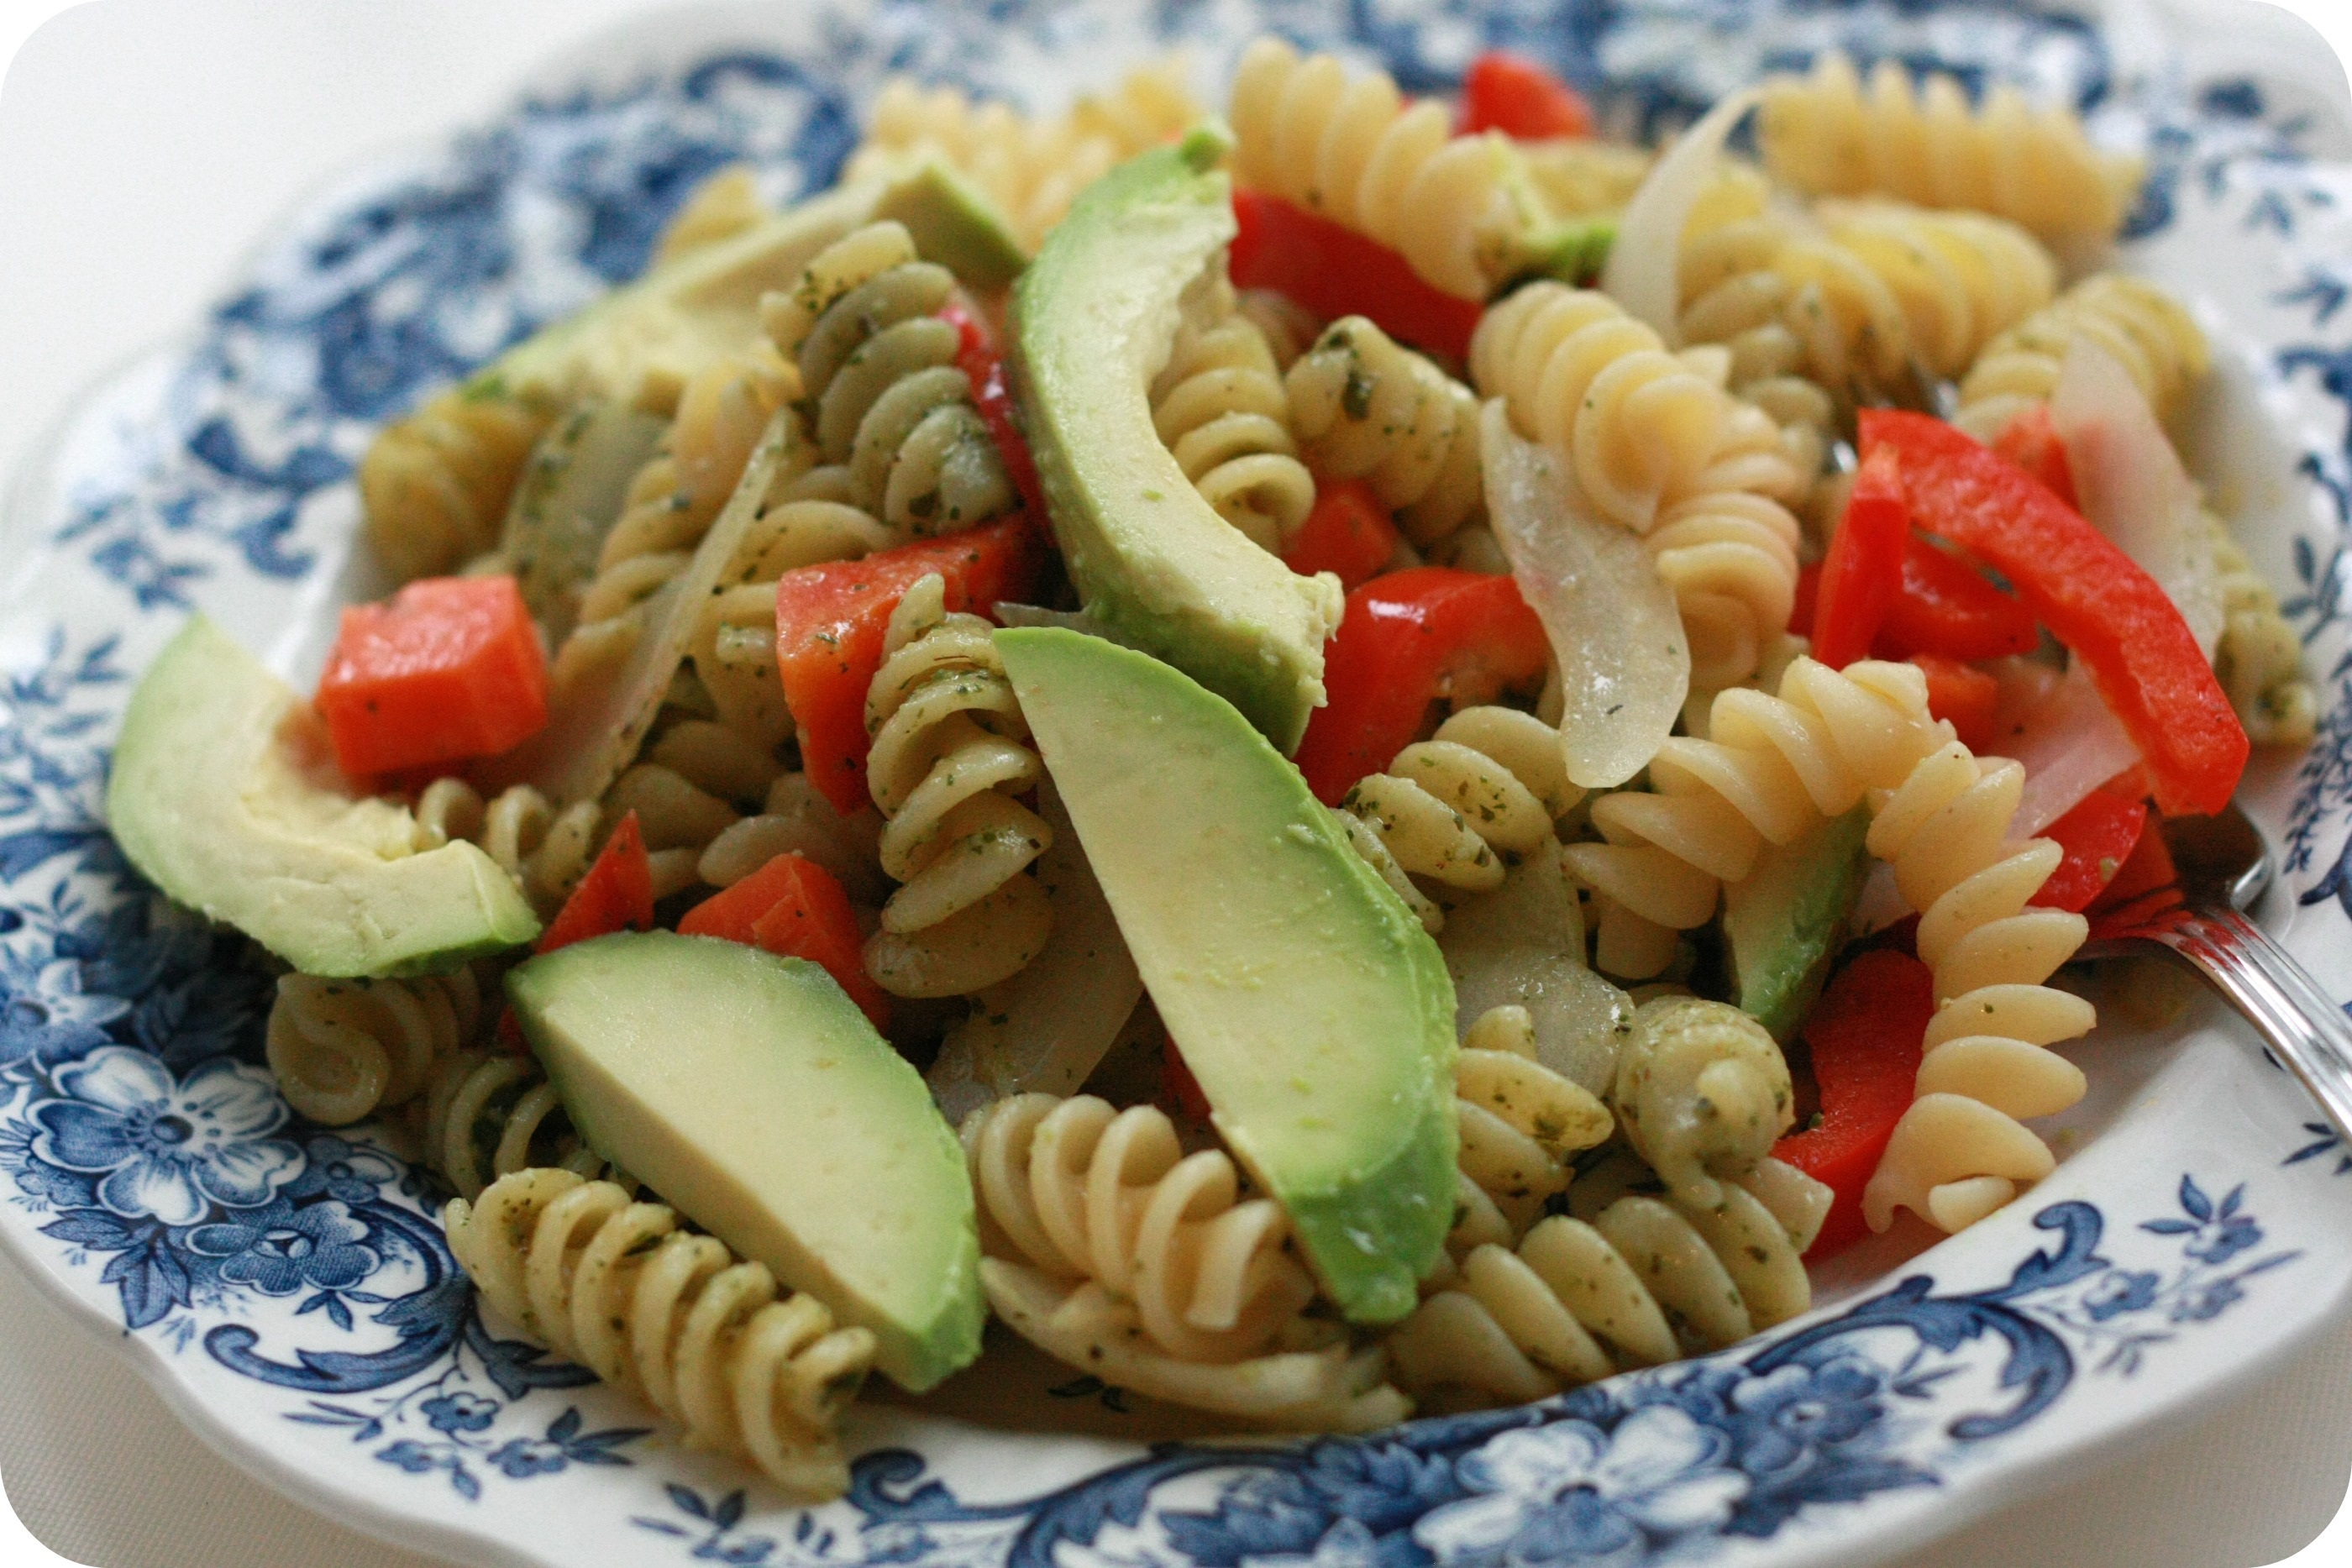 File:Rotini pasta with pesto sauce, tossed in red peppers, carrots and sweet onions - topped with slices of avocado (6489213475).jpg - Wikimedia Commons